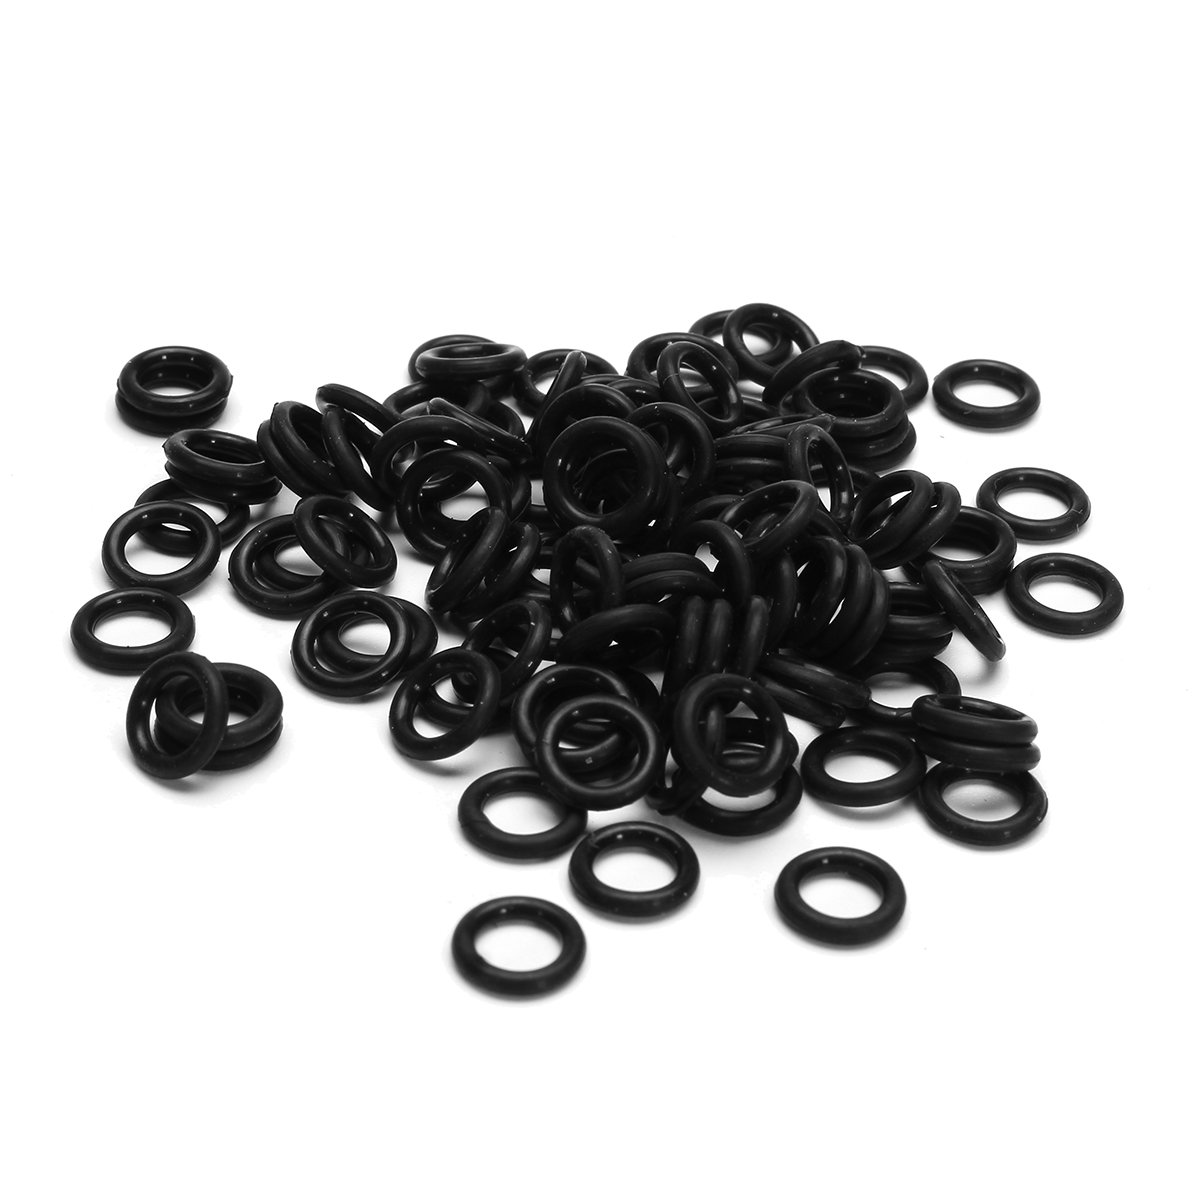 100 Mechanical Keyboard Keycap Rubber O-Ring Switch Dampeners for Cherry MX 1